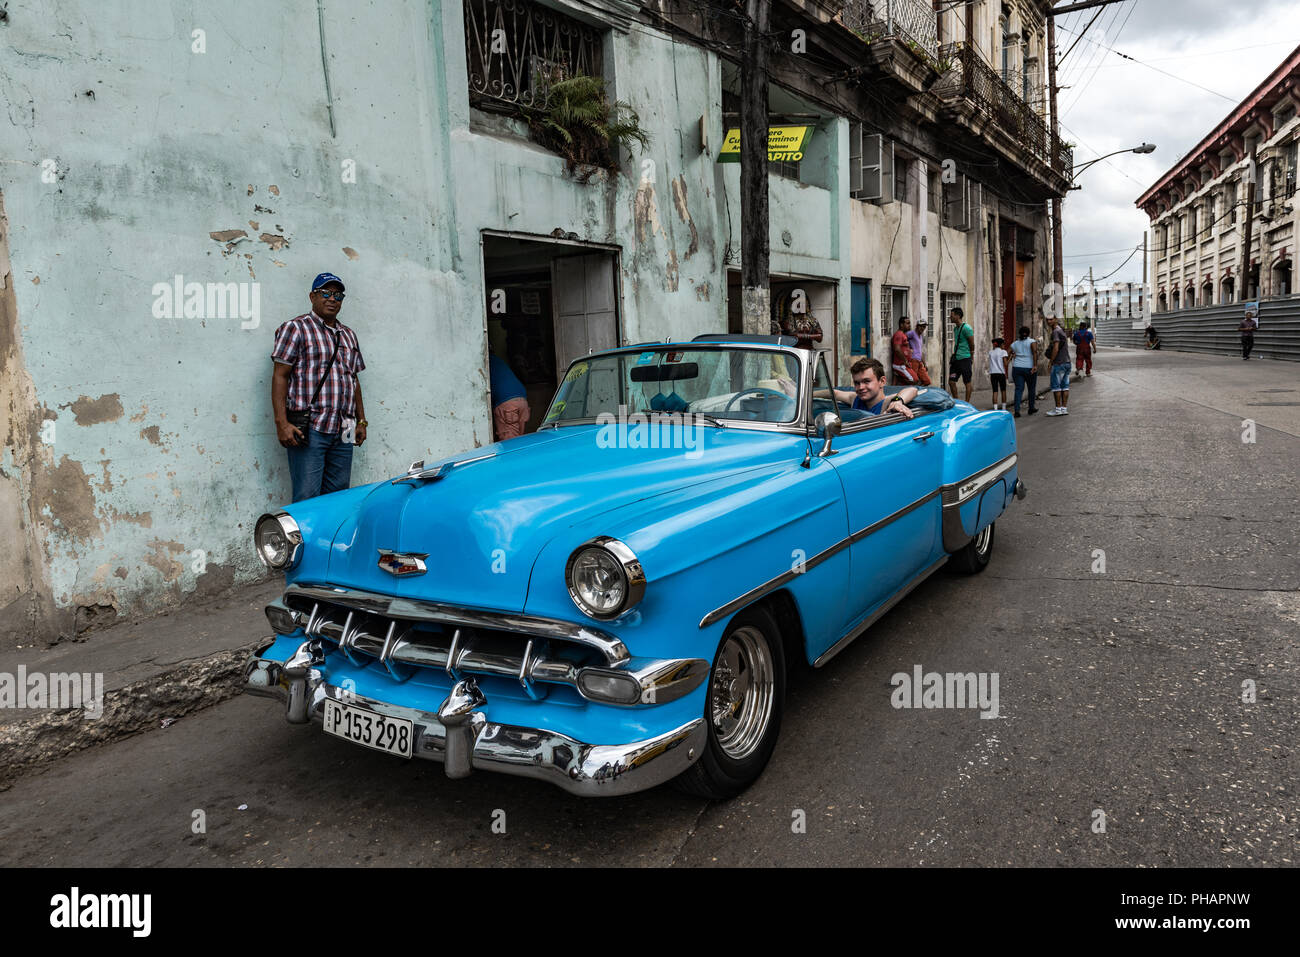 Young tourist sitting in back seat of classic car on tour of Old Havana, Cuba. Stock Photo